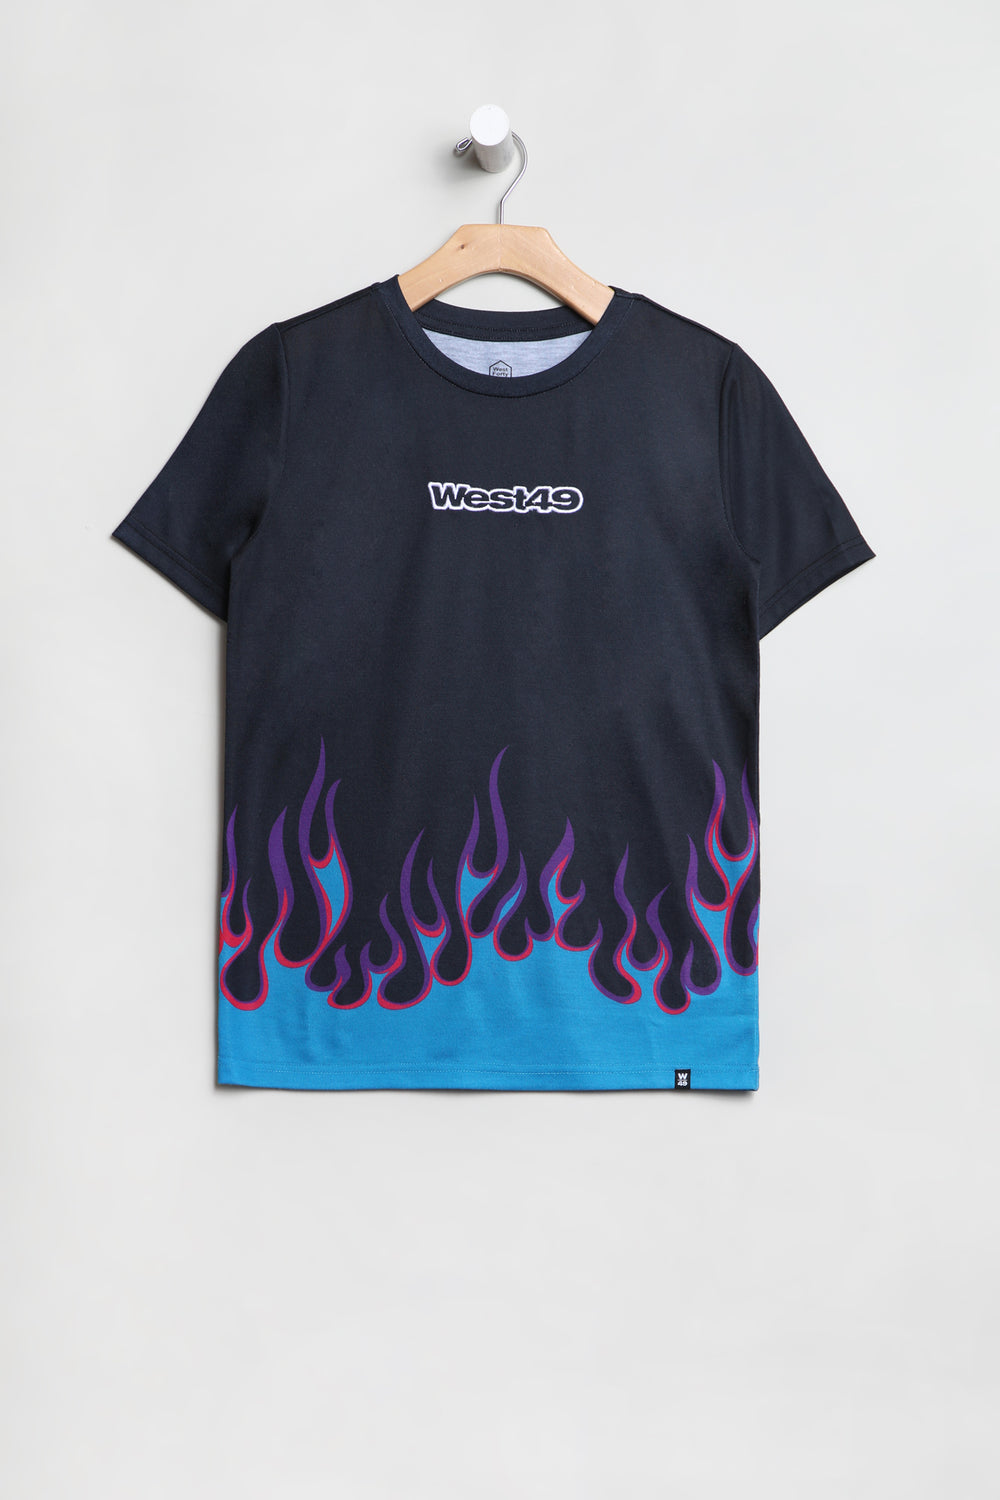 West49 Youth Blue Flames T-Shirt Black